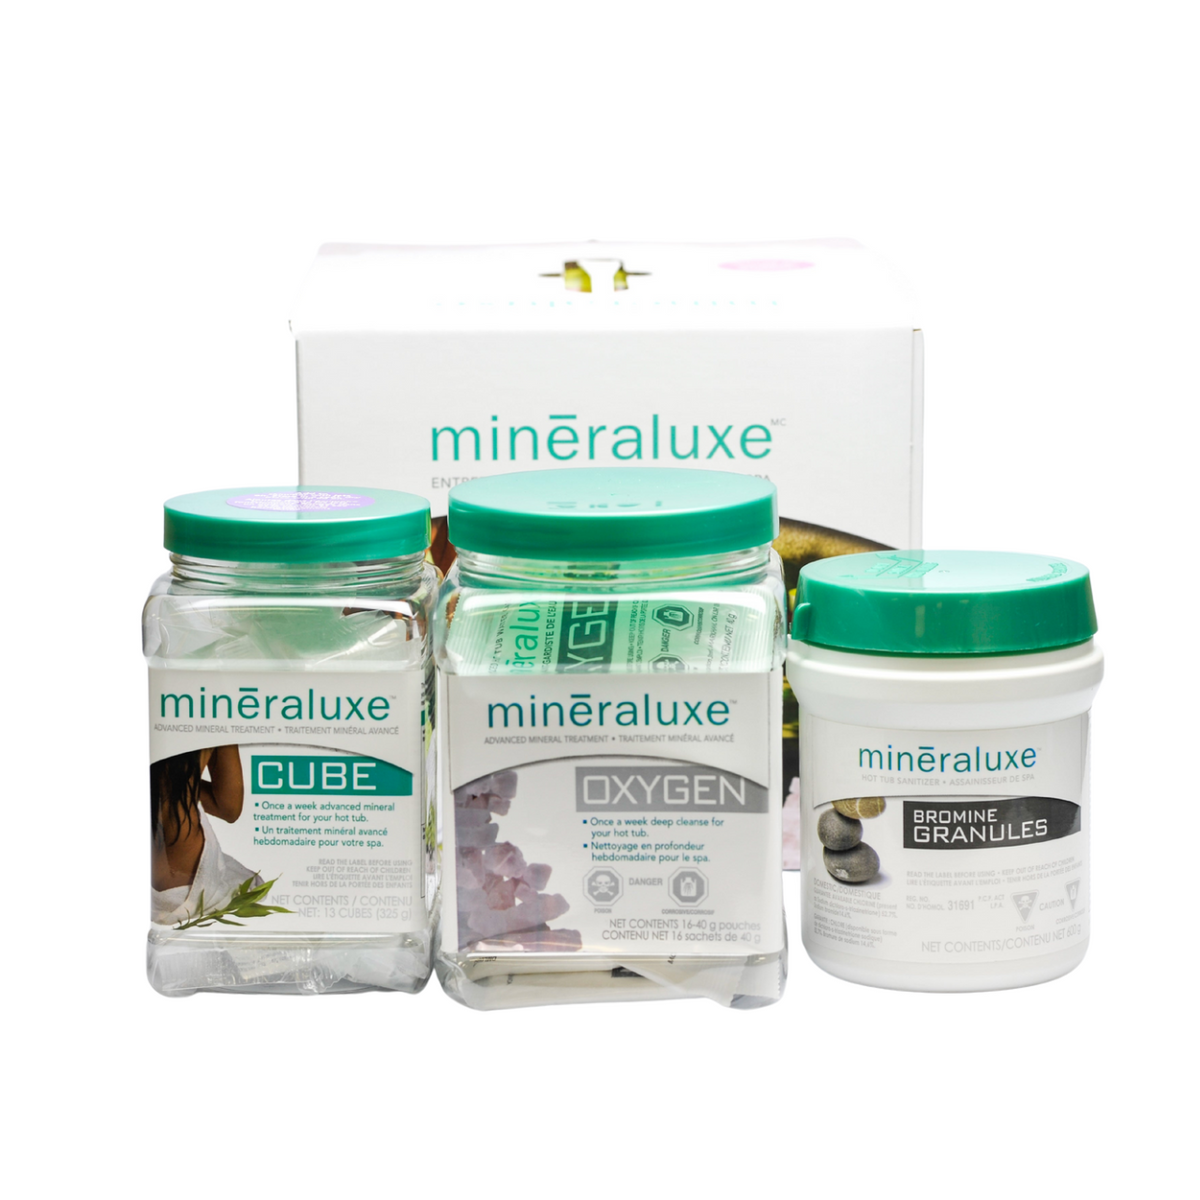 Mineraluxe™ 3 Month Bromine Granules Mineraluxe System